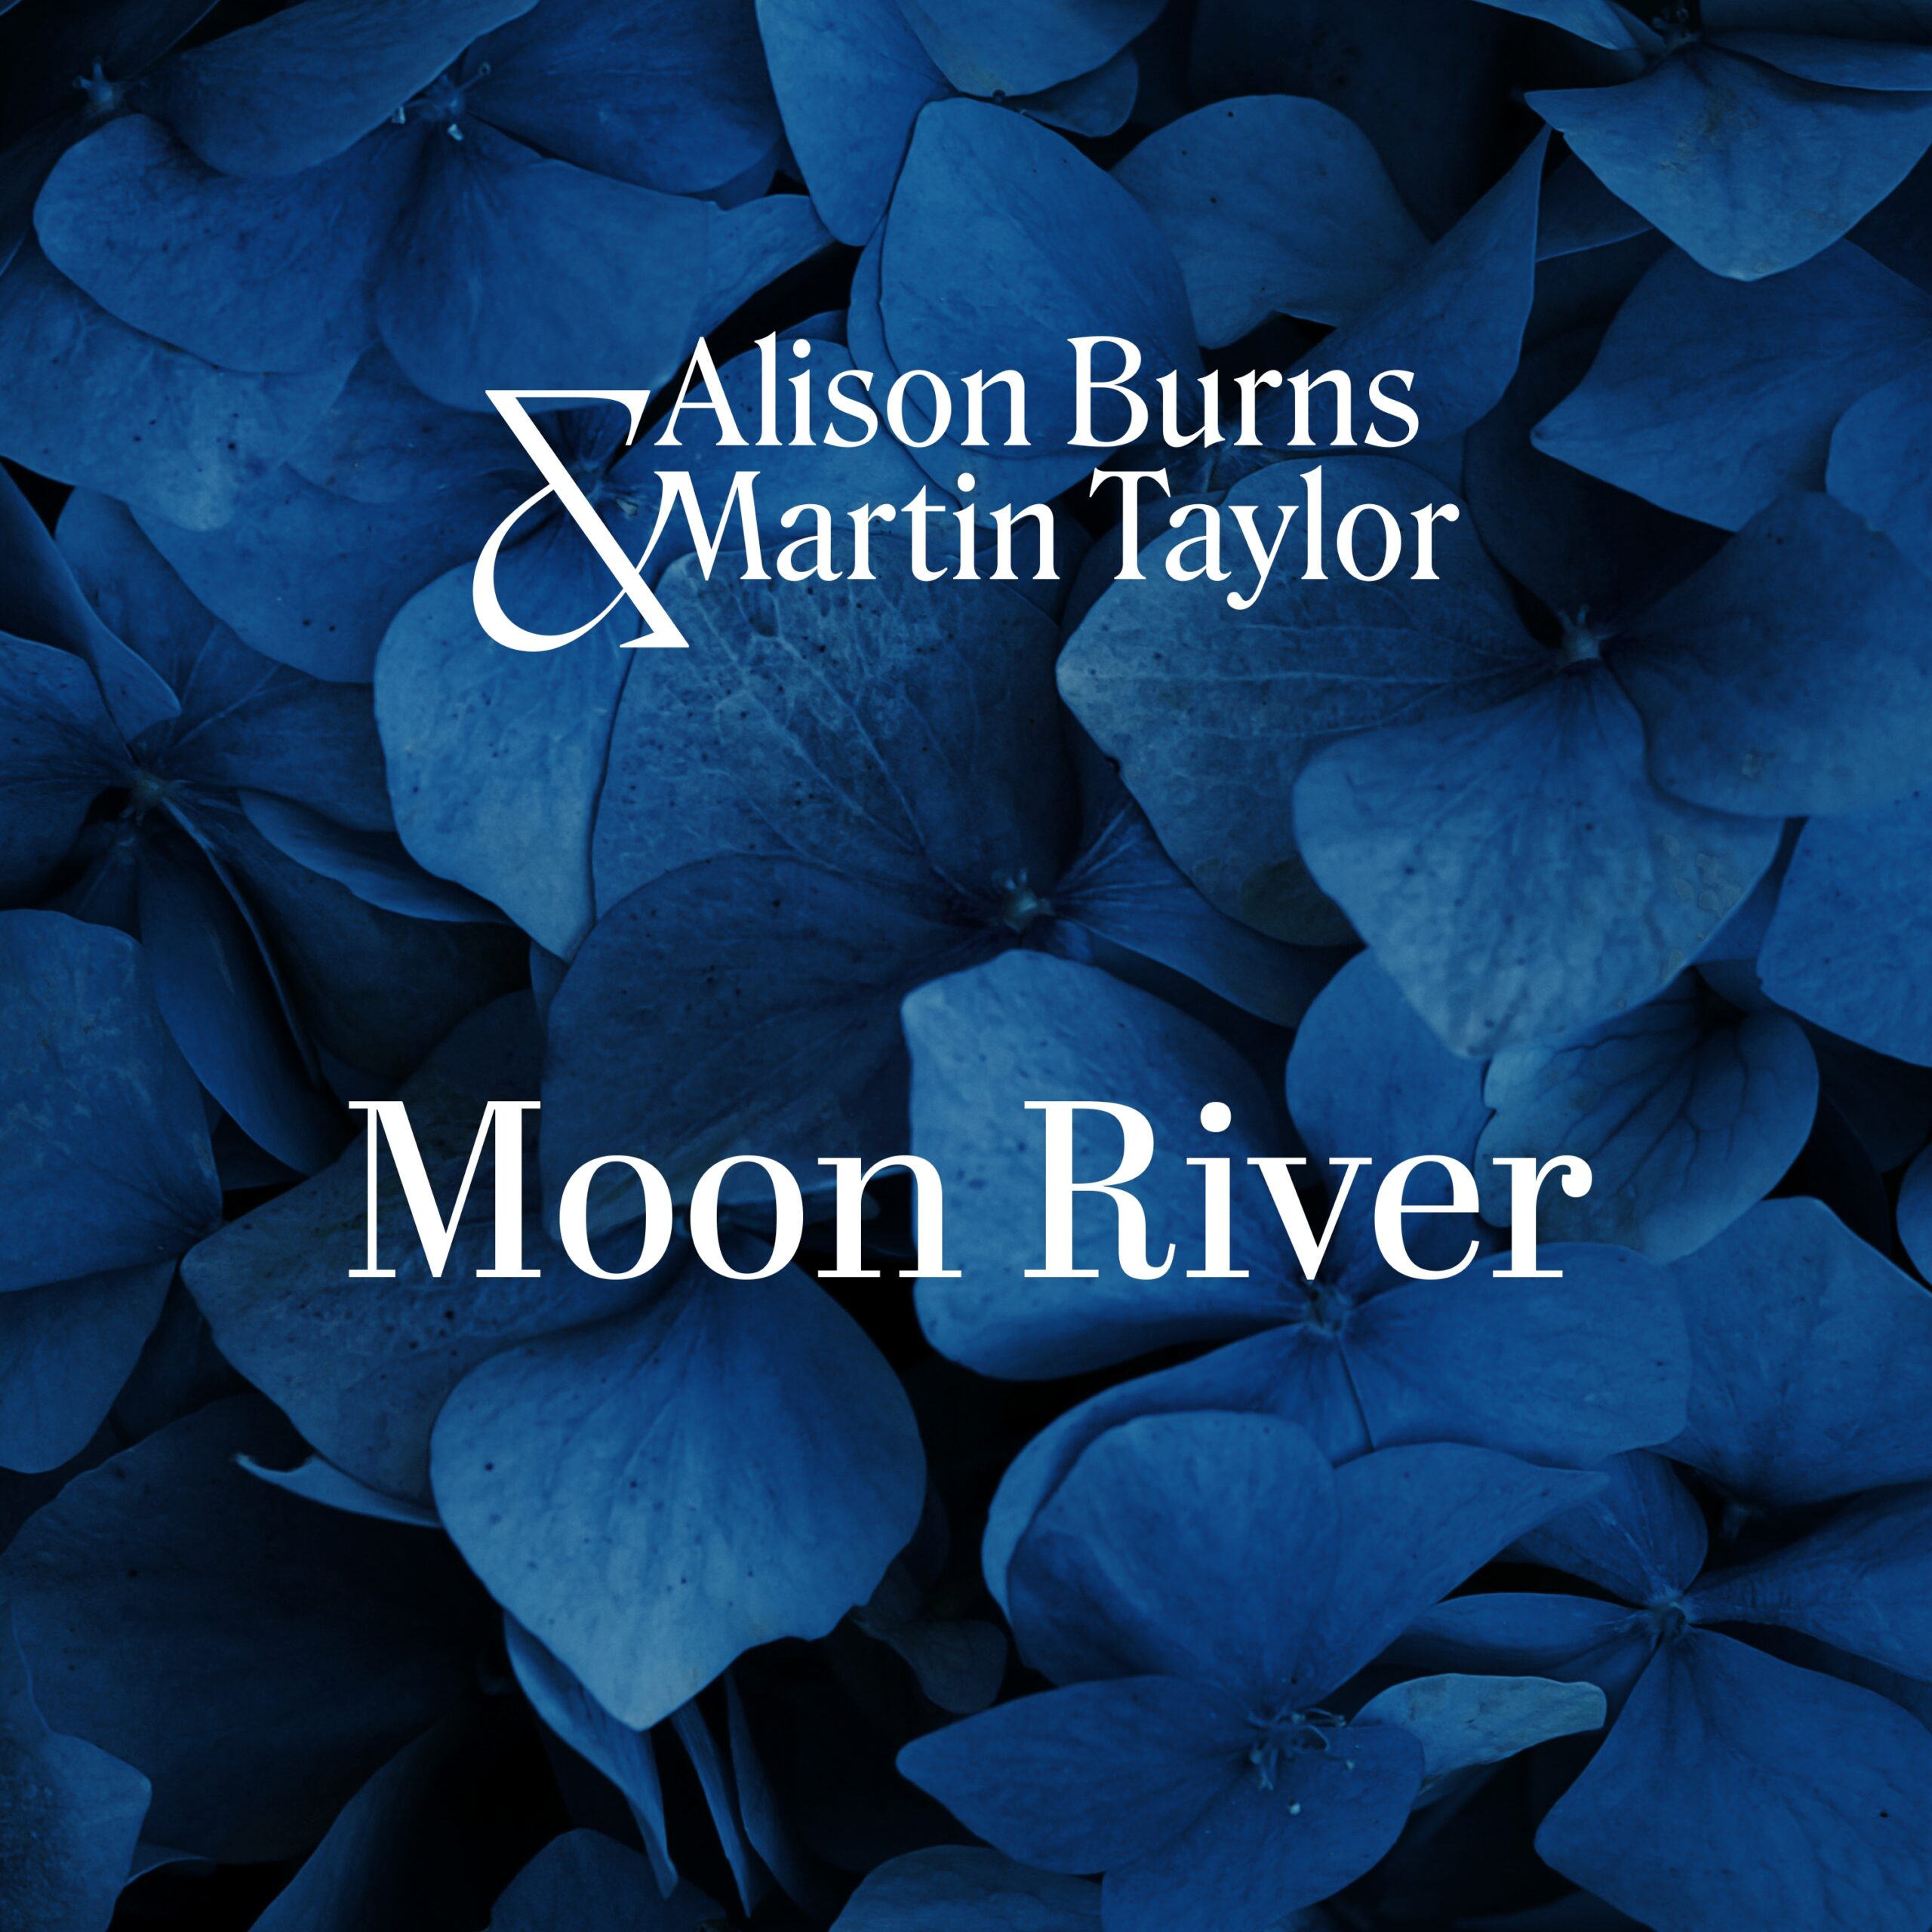 Moon River by Alison Burns and Martin Taylor